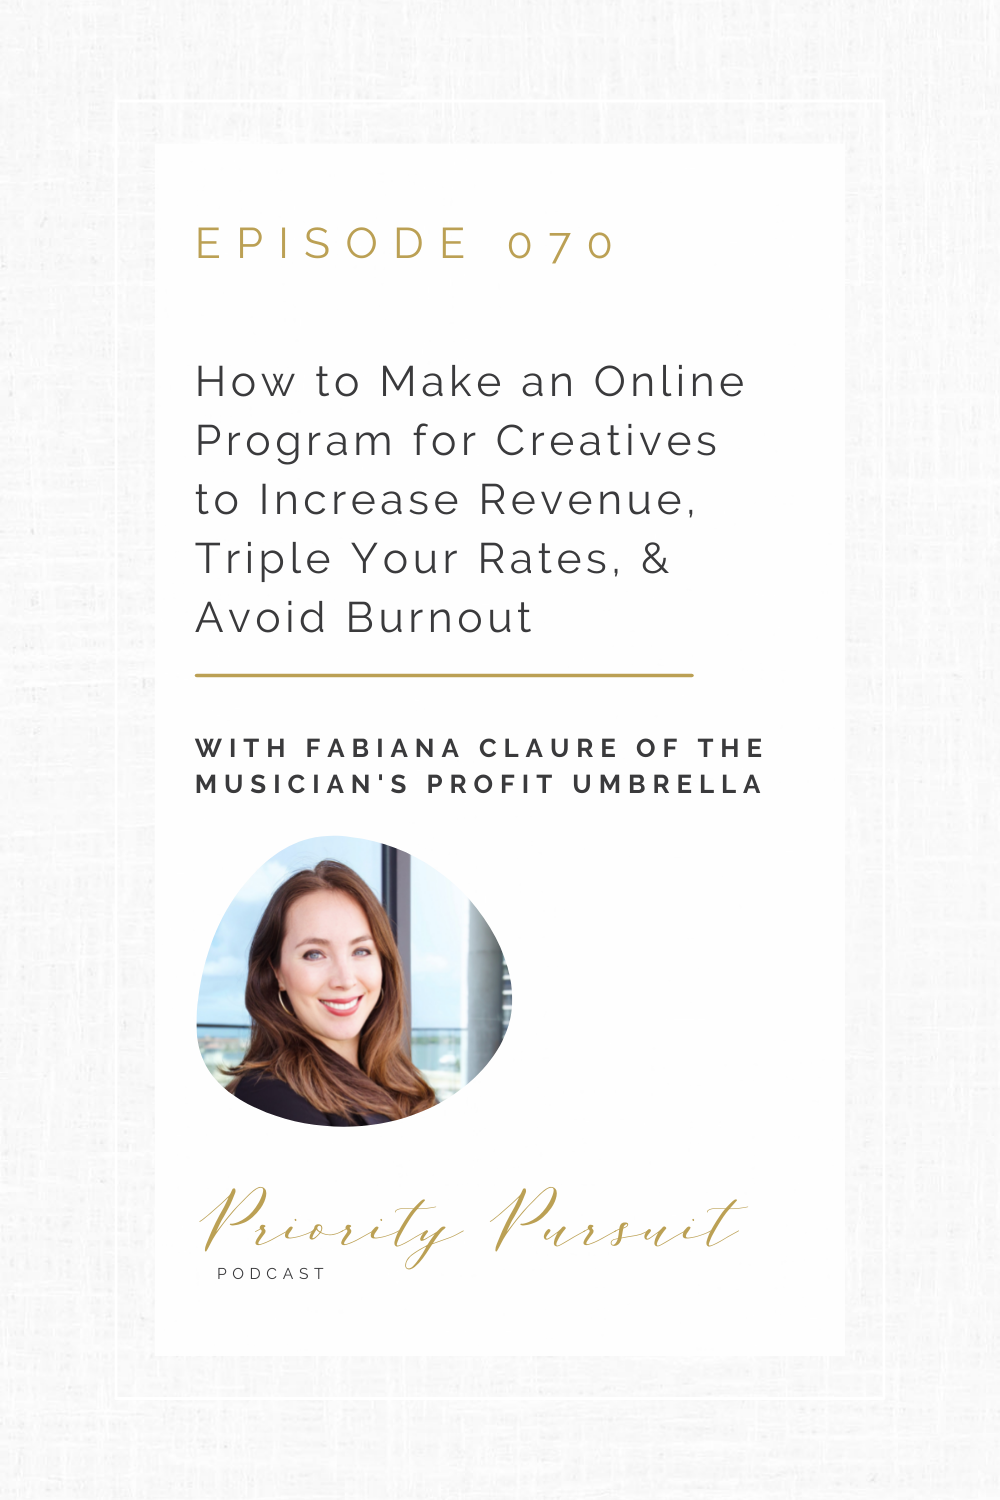 Victoria Rayburn and Fabiana Claure discuss how creative entrepreneurs can make an online program for creatives to grow their businesses.